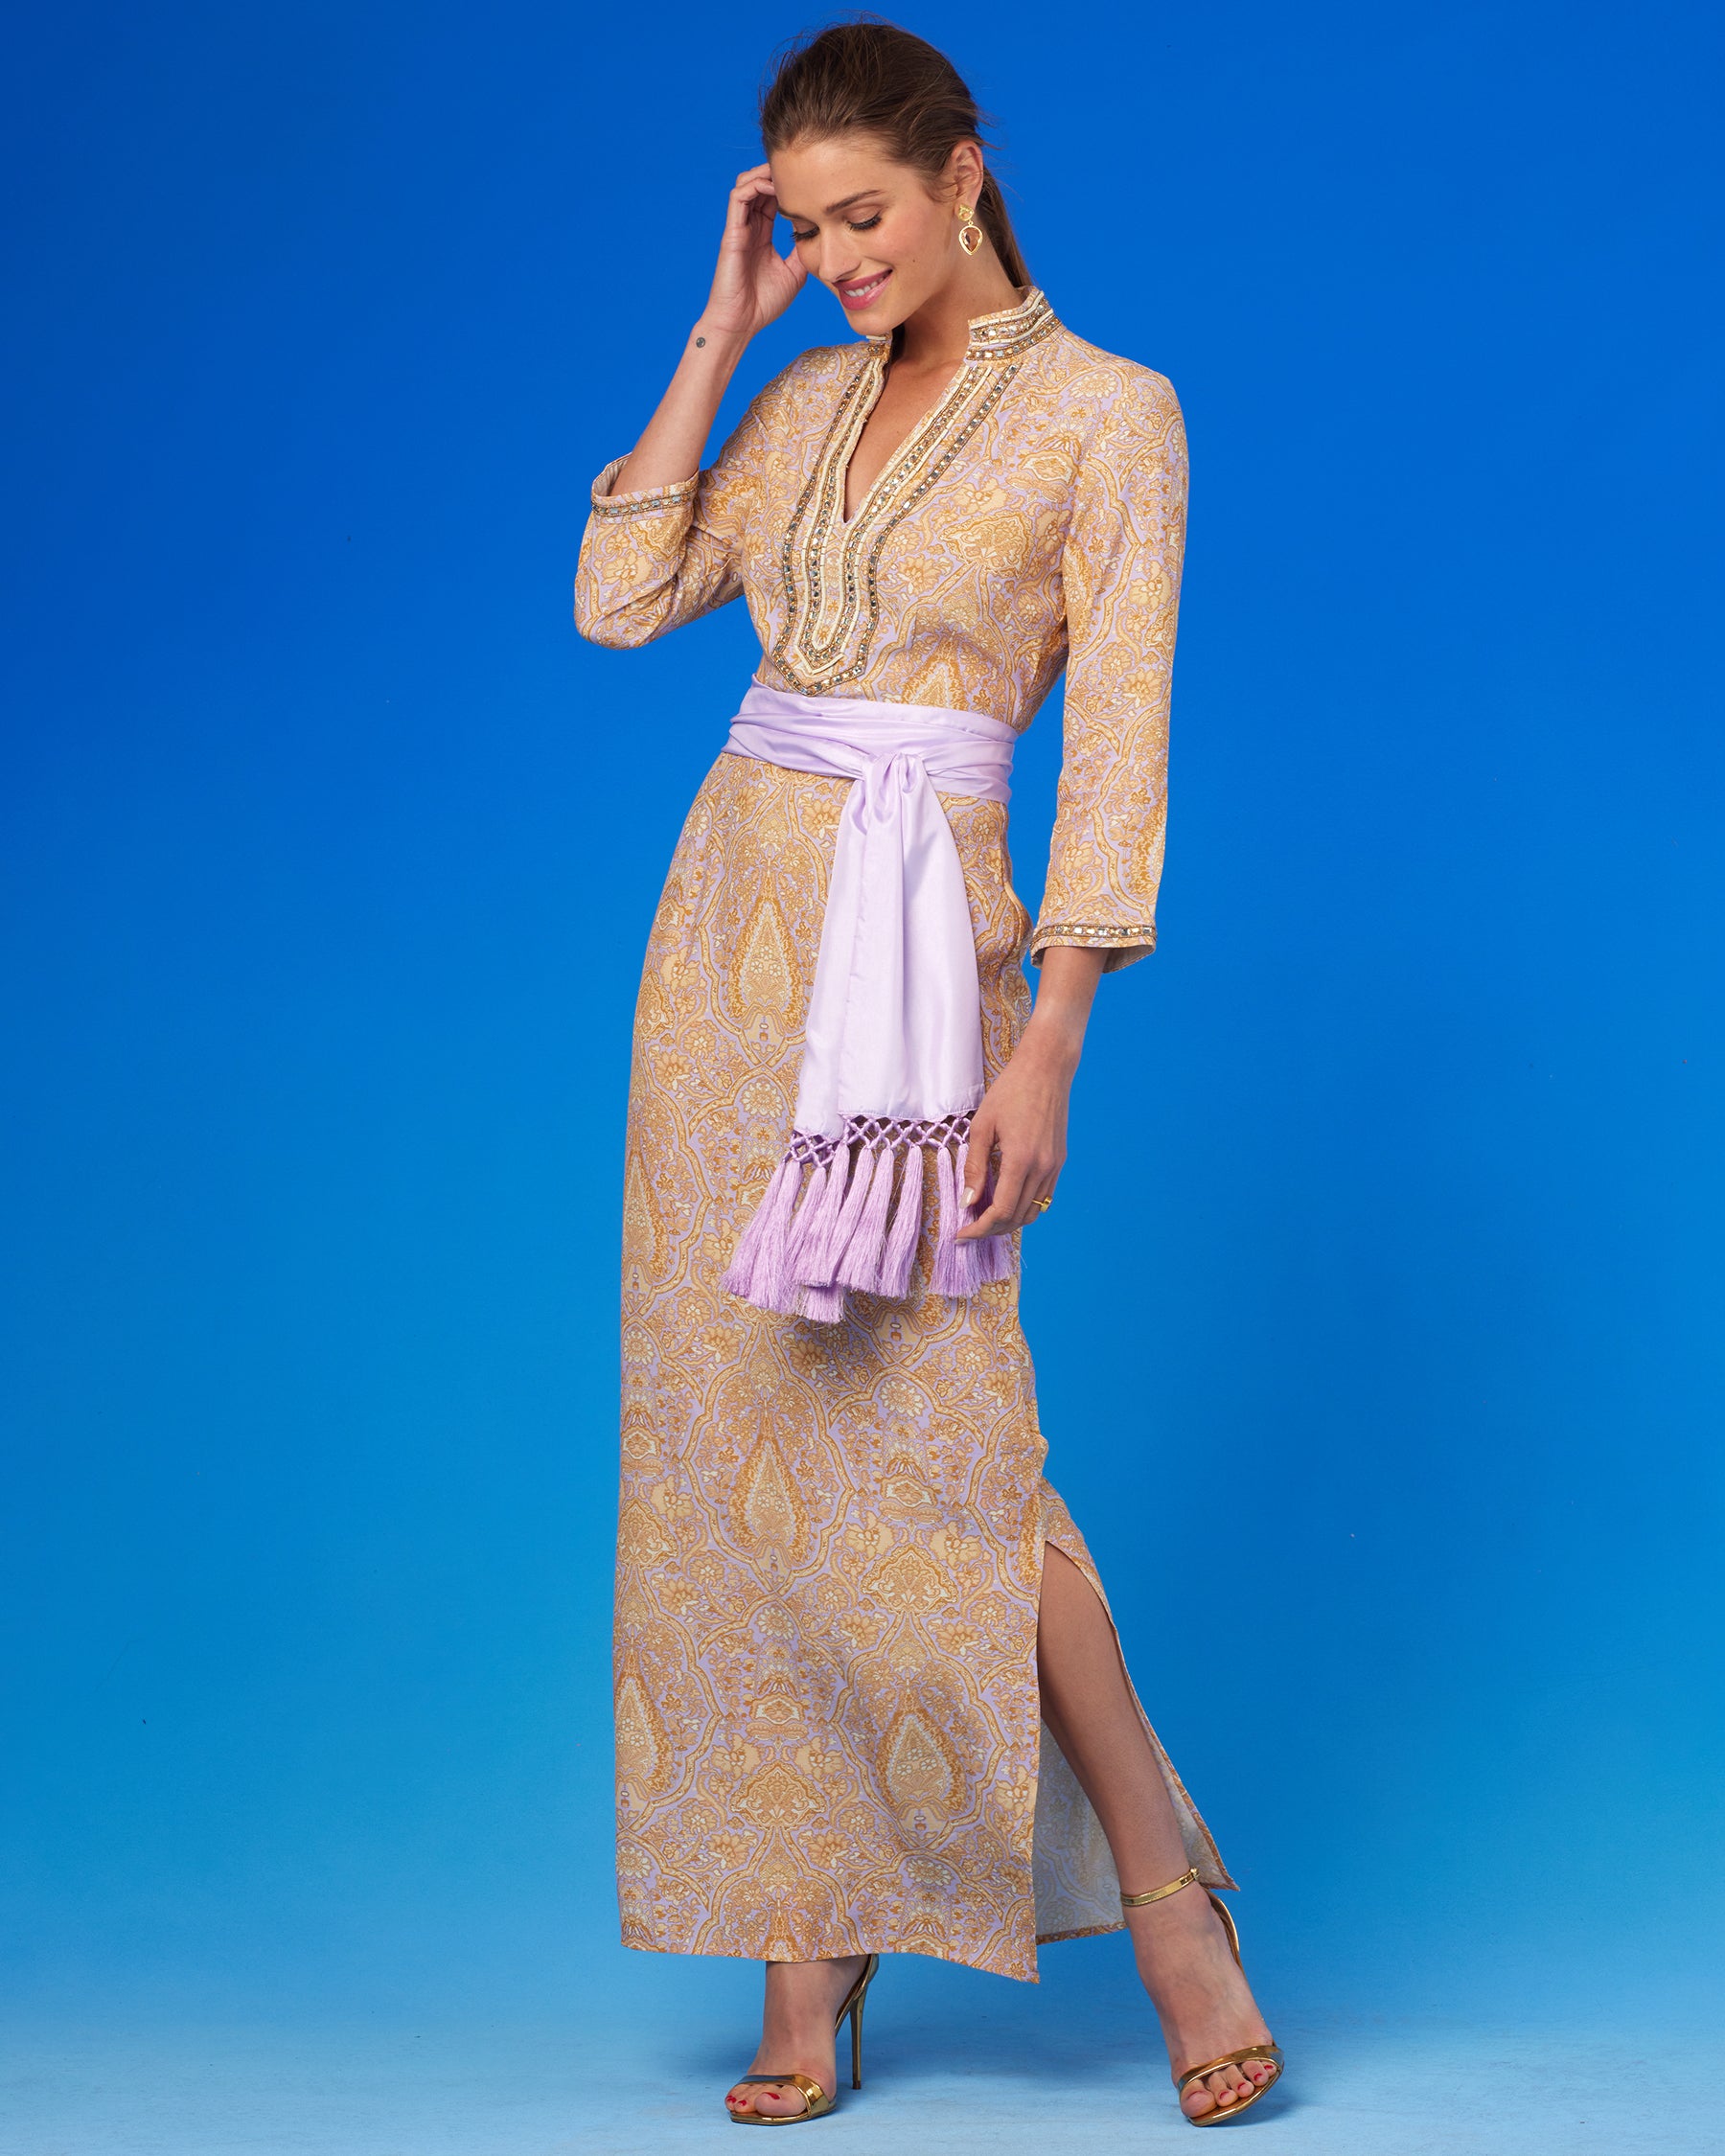 Laetitia Long Dress in Saffron on Lavender with Jewel Embellishment-Side View